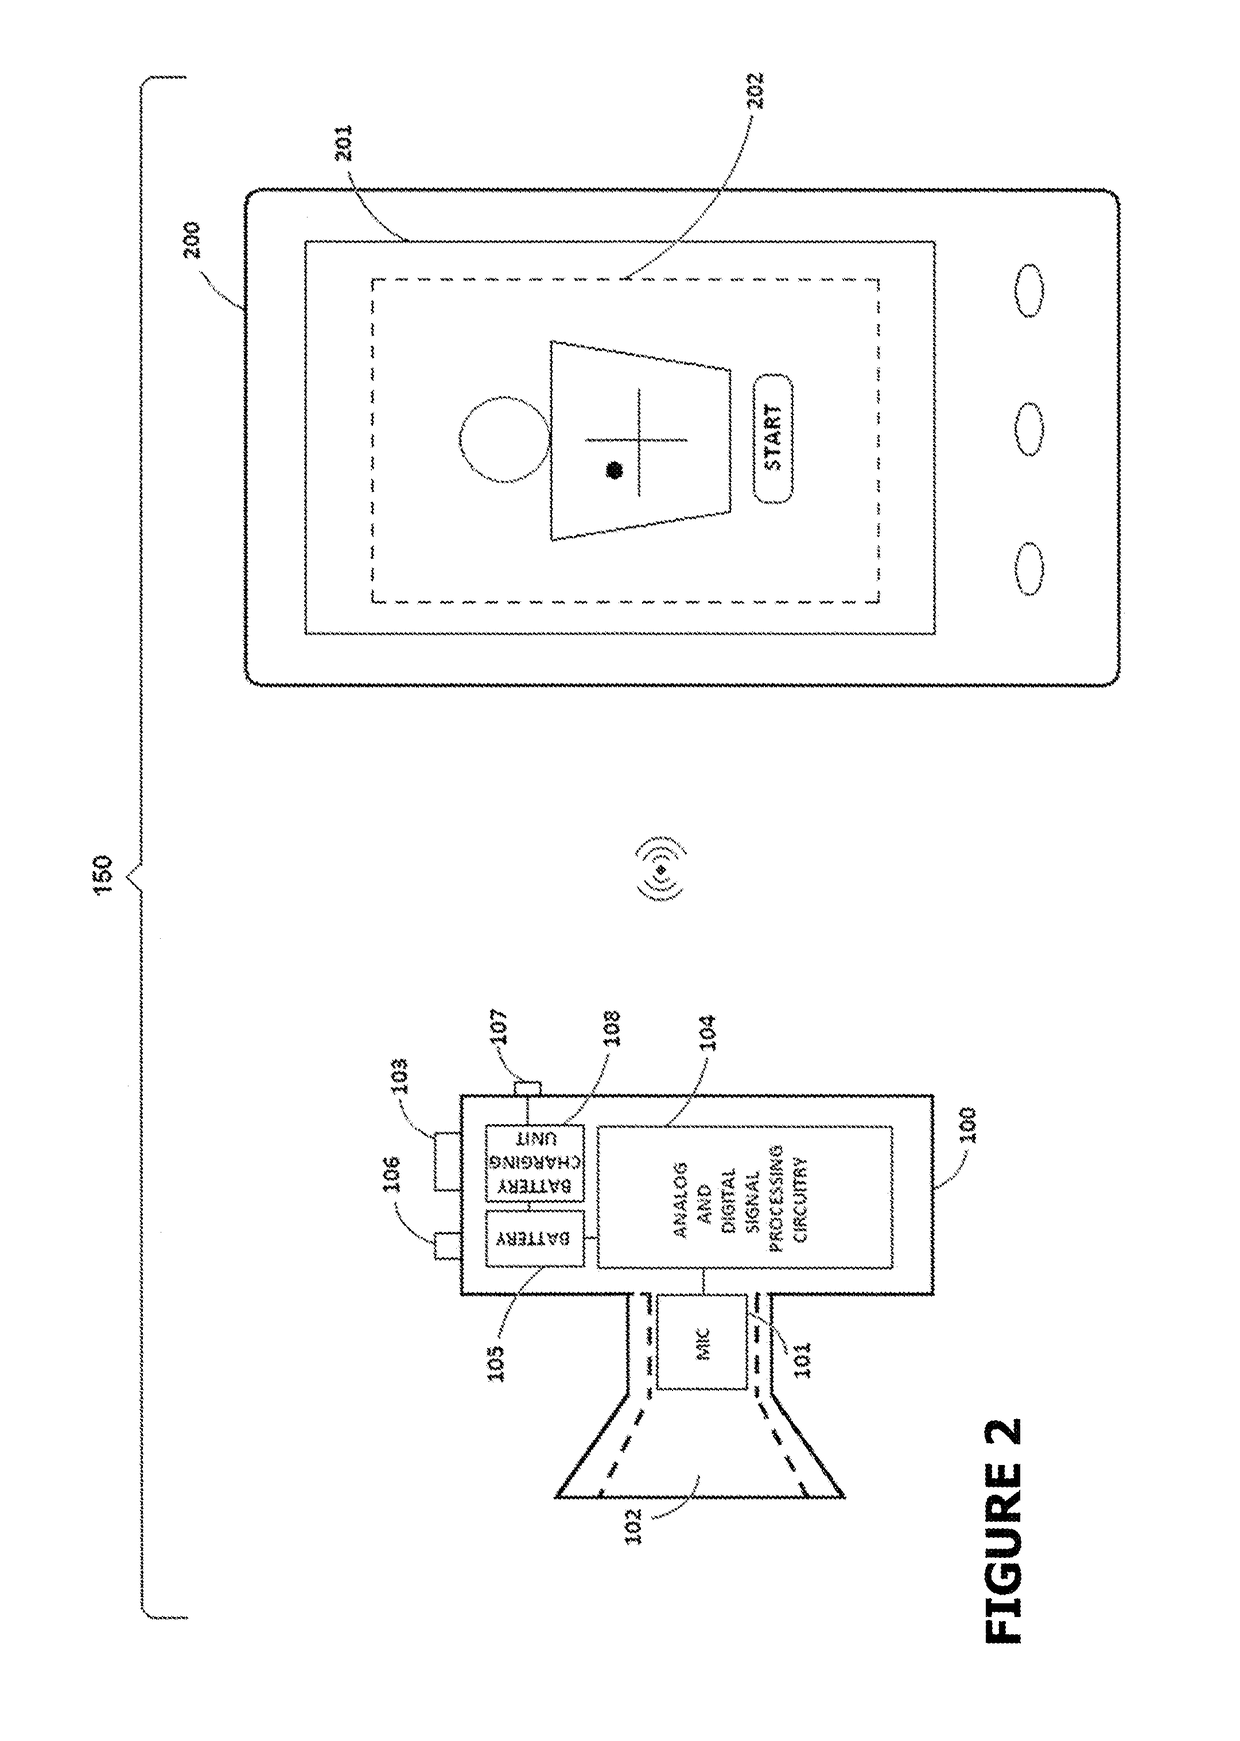 Auscultation data acquisition, communication and evaluation system incorporating mobile facilities